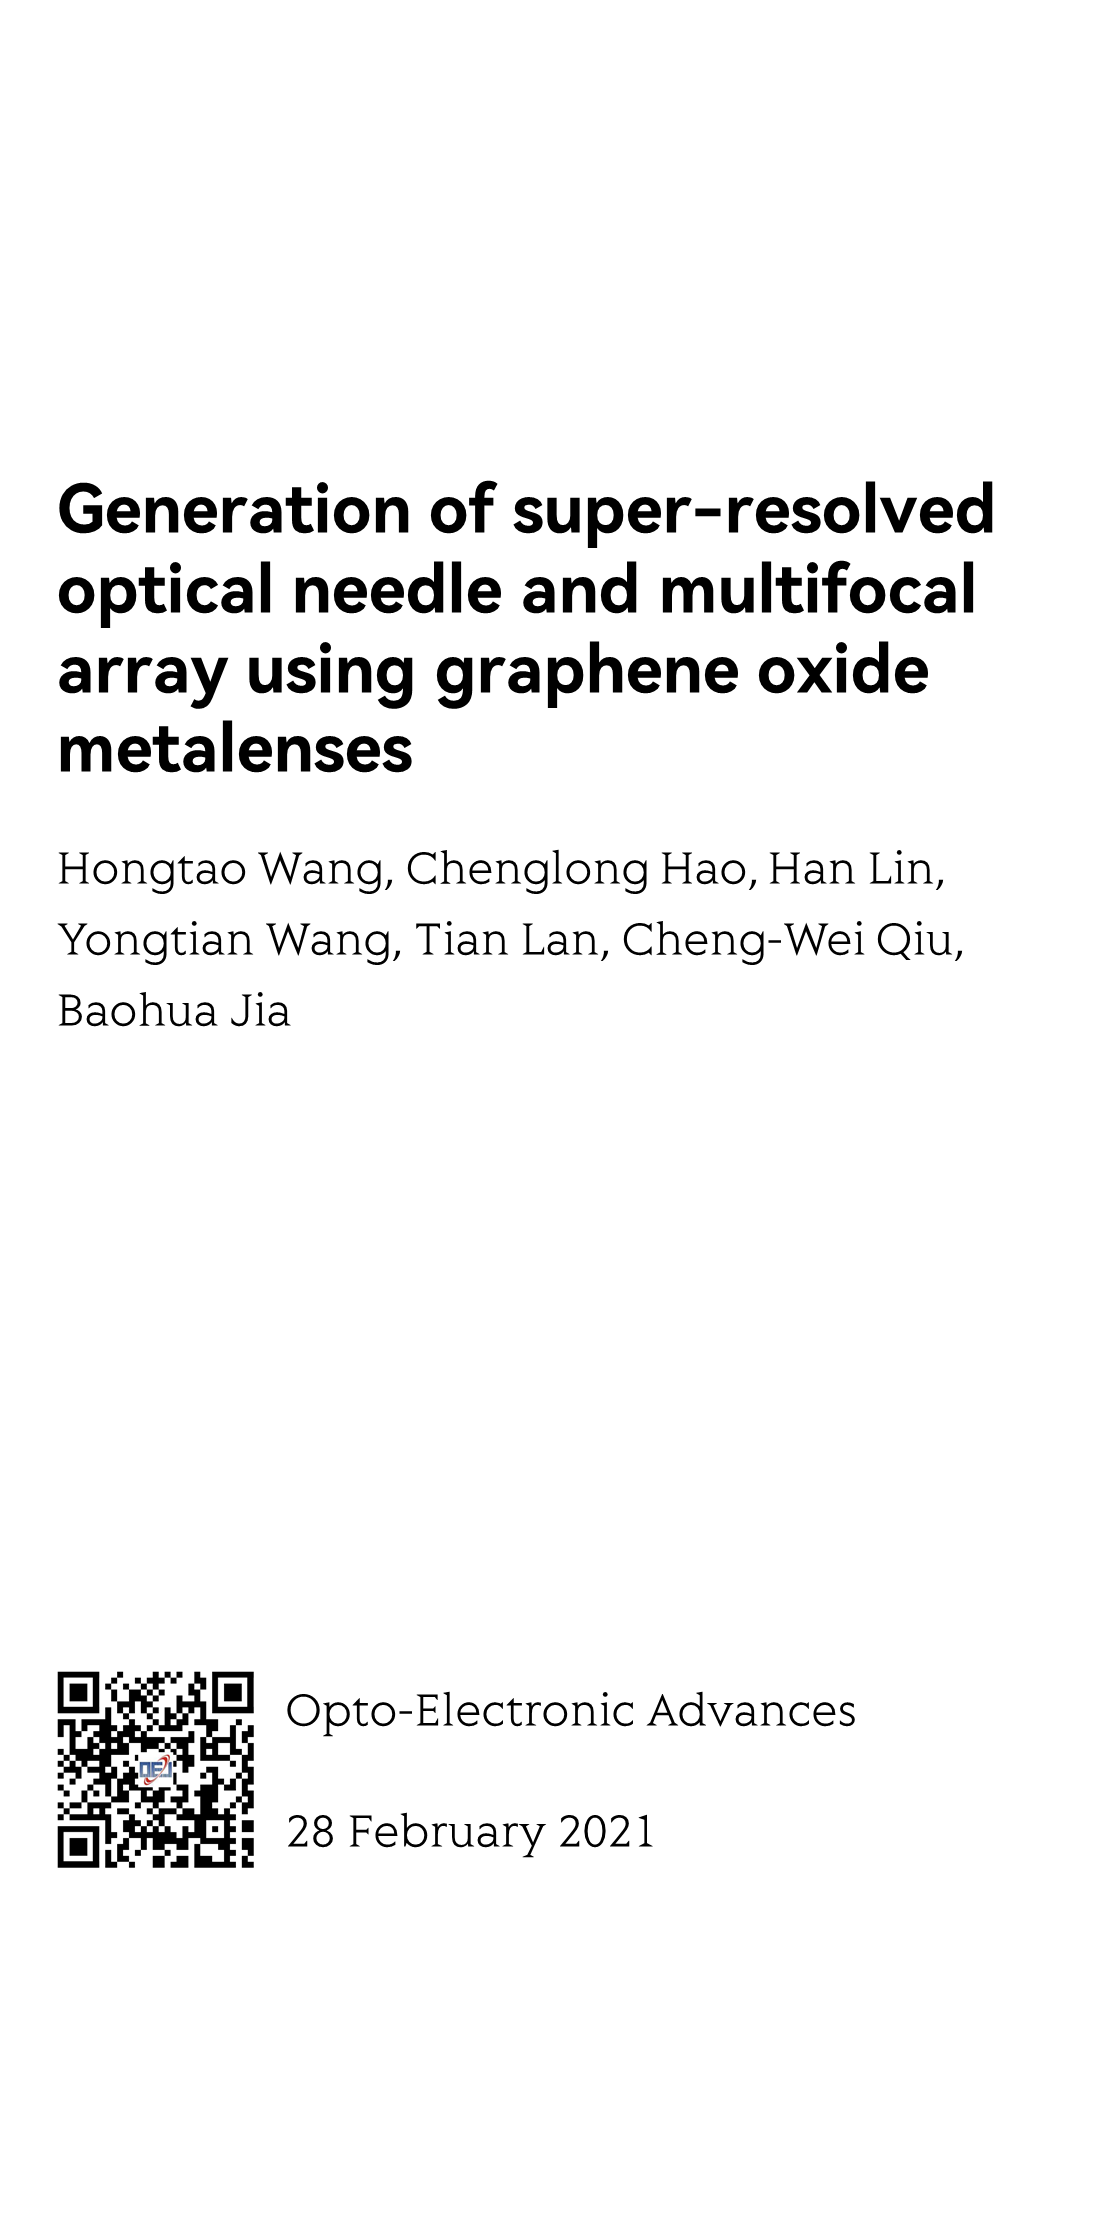 Generation of super-resolved optical needle and multifocal array using graphene oxide metalenses_1